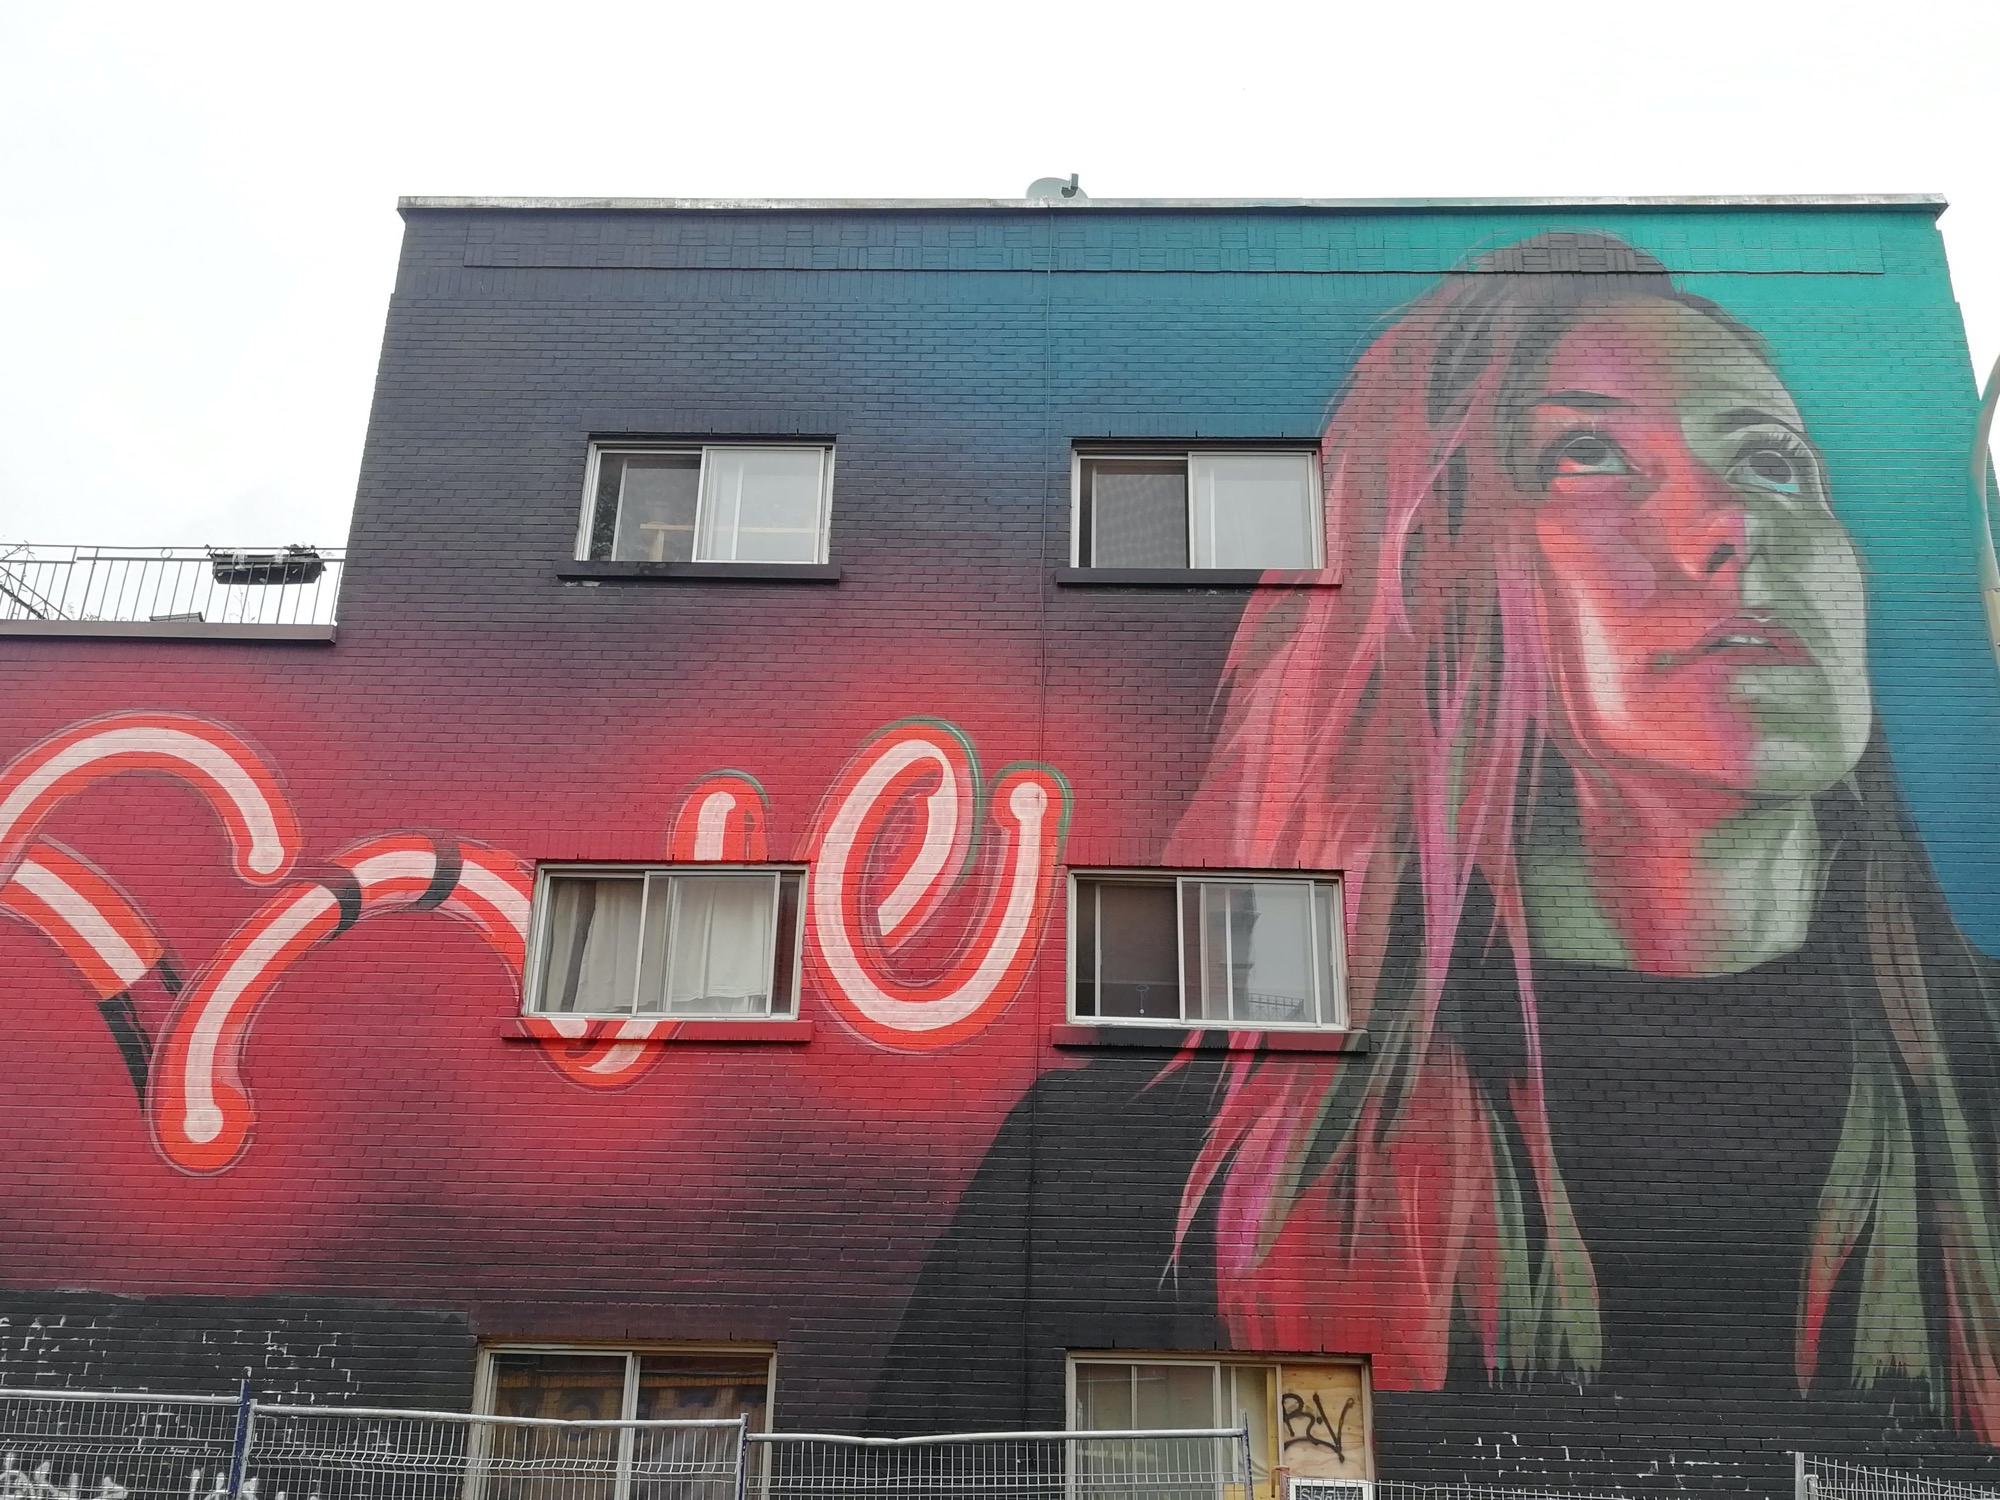 Graffiti 2936  by the artist Five Eight captured by Rabot in Montréal Canada